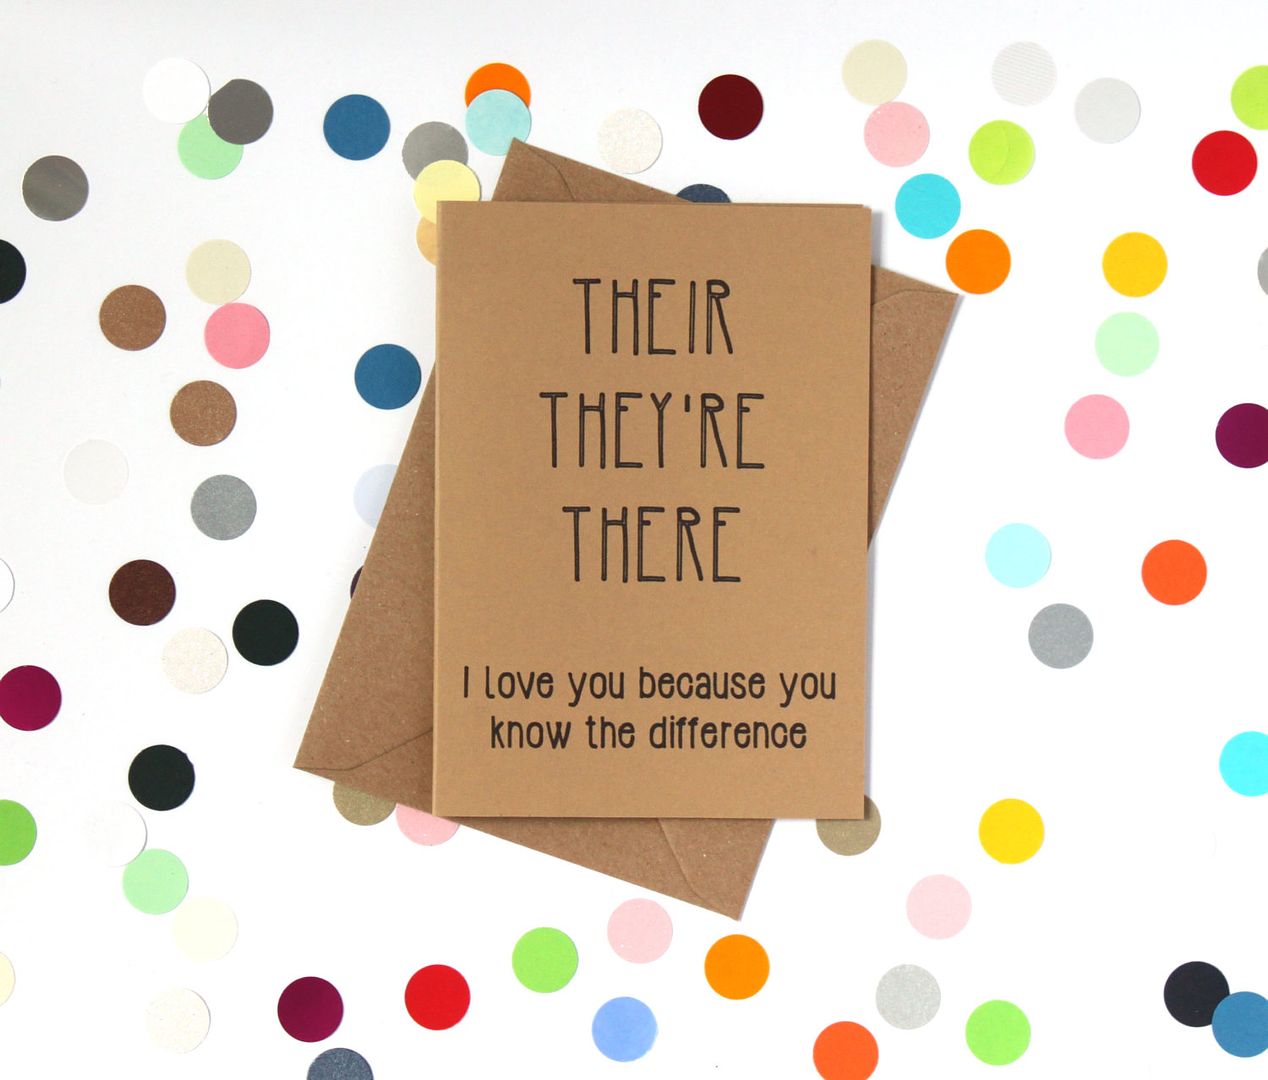 Funny Valentine's card for grammar nerds. Love this!